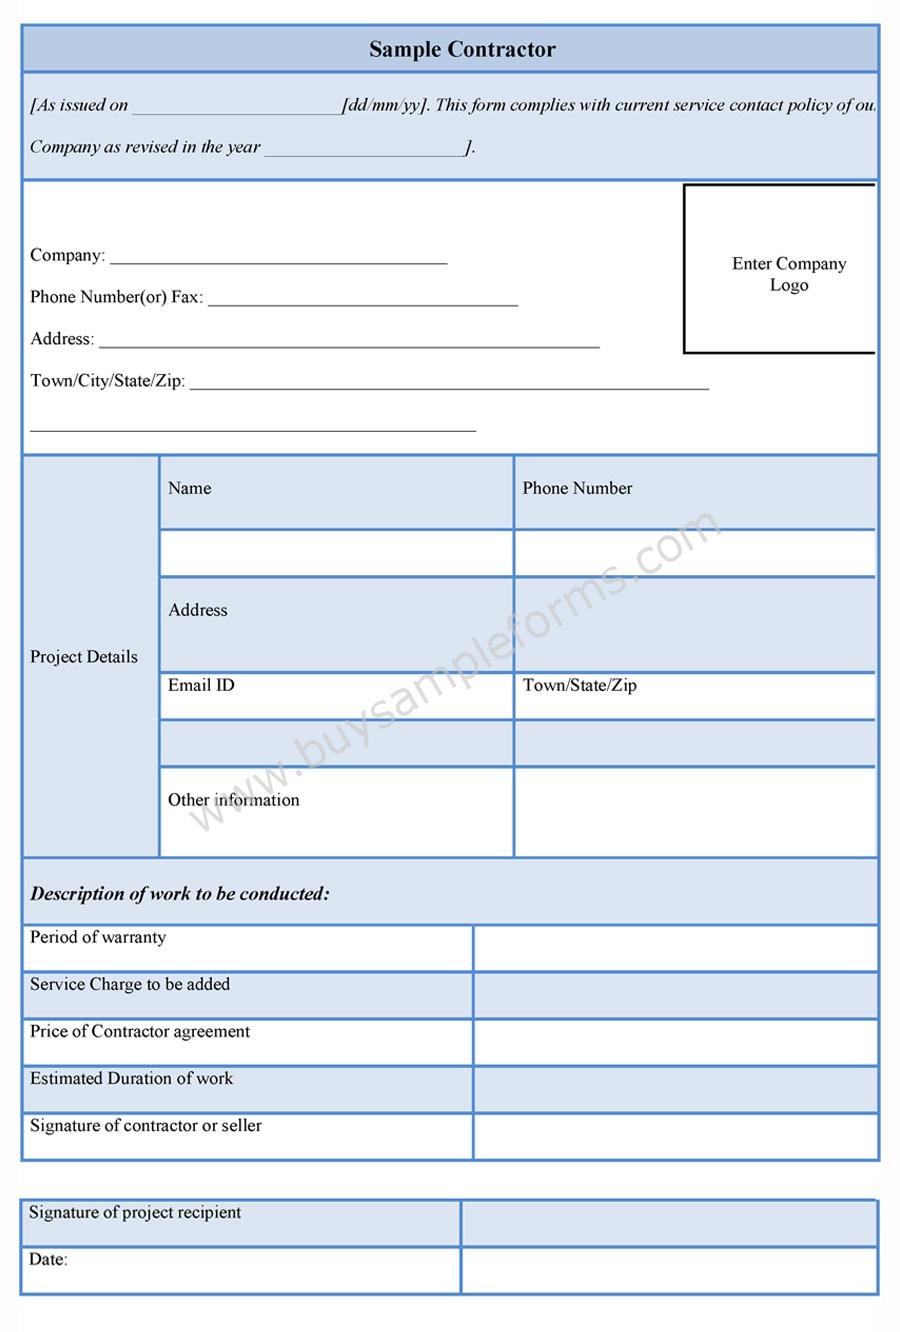 Sample Contractor Form Contractor Forms Examples